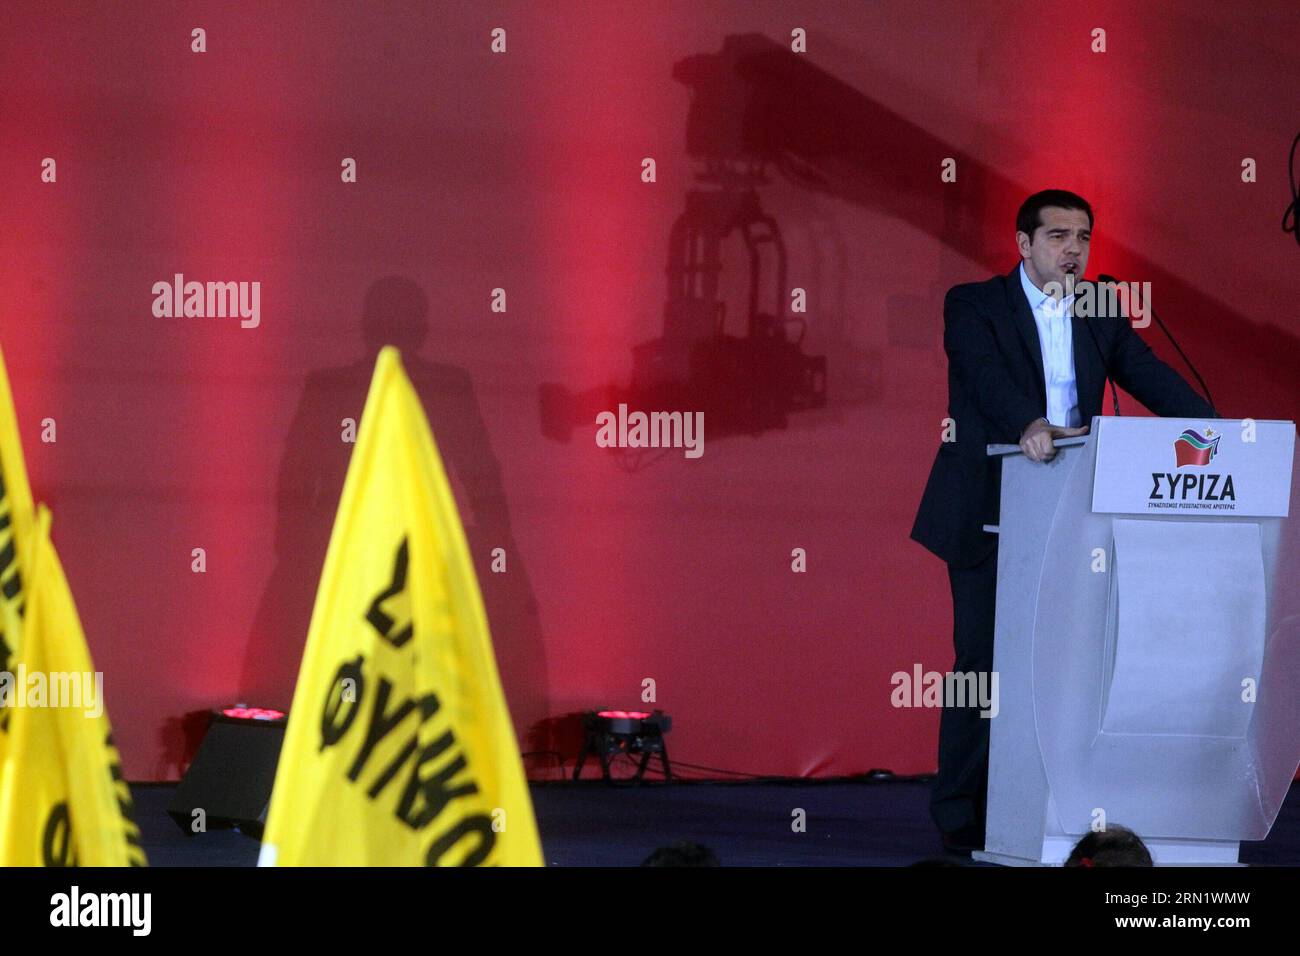 (150122) -- ATHENS, Jan. 22, 2015 -- Alexis Tsipras, leader of Greece s SYRIZA left-wing main opposition party, delivers a pre-election speech at Omonia Square in Athens, Greece, Jan. 22, 2015. In opinion surveys, the radical left SYRIZA party runs ahead of the incumbent conservatives and the party s rhetoric over a re-evaluation of the cooperation with international creditors who kept Greece afloat since 2010, still scares many domestic and international investors. ) GREECE-ATHENS-ELECTION-CAMPAIGN-SYRIZA PARTY MariosxLolos PUBLICATIONxNOTxINxCHN   Athens Jan 22 2015 Alexis Tsipras Leader of Stock Photo